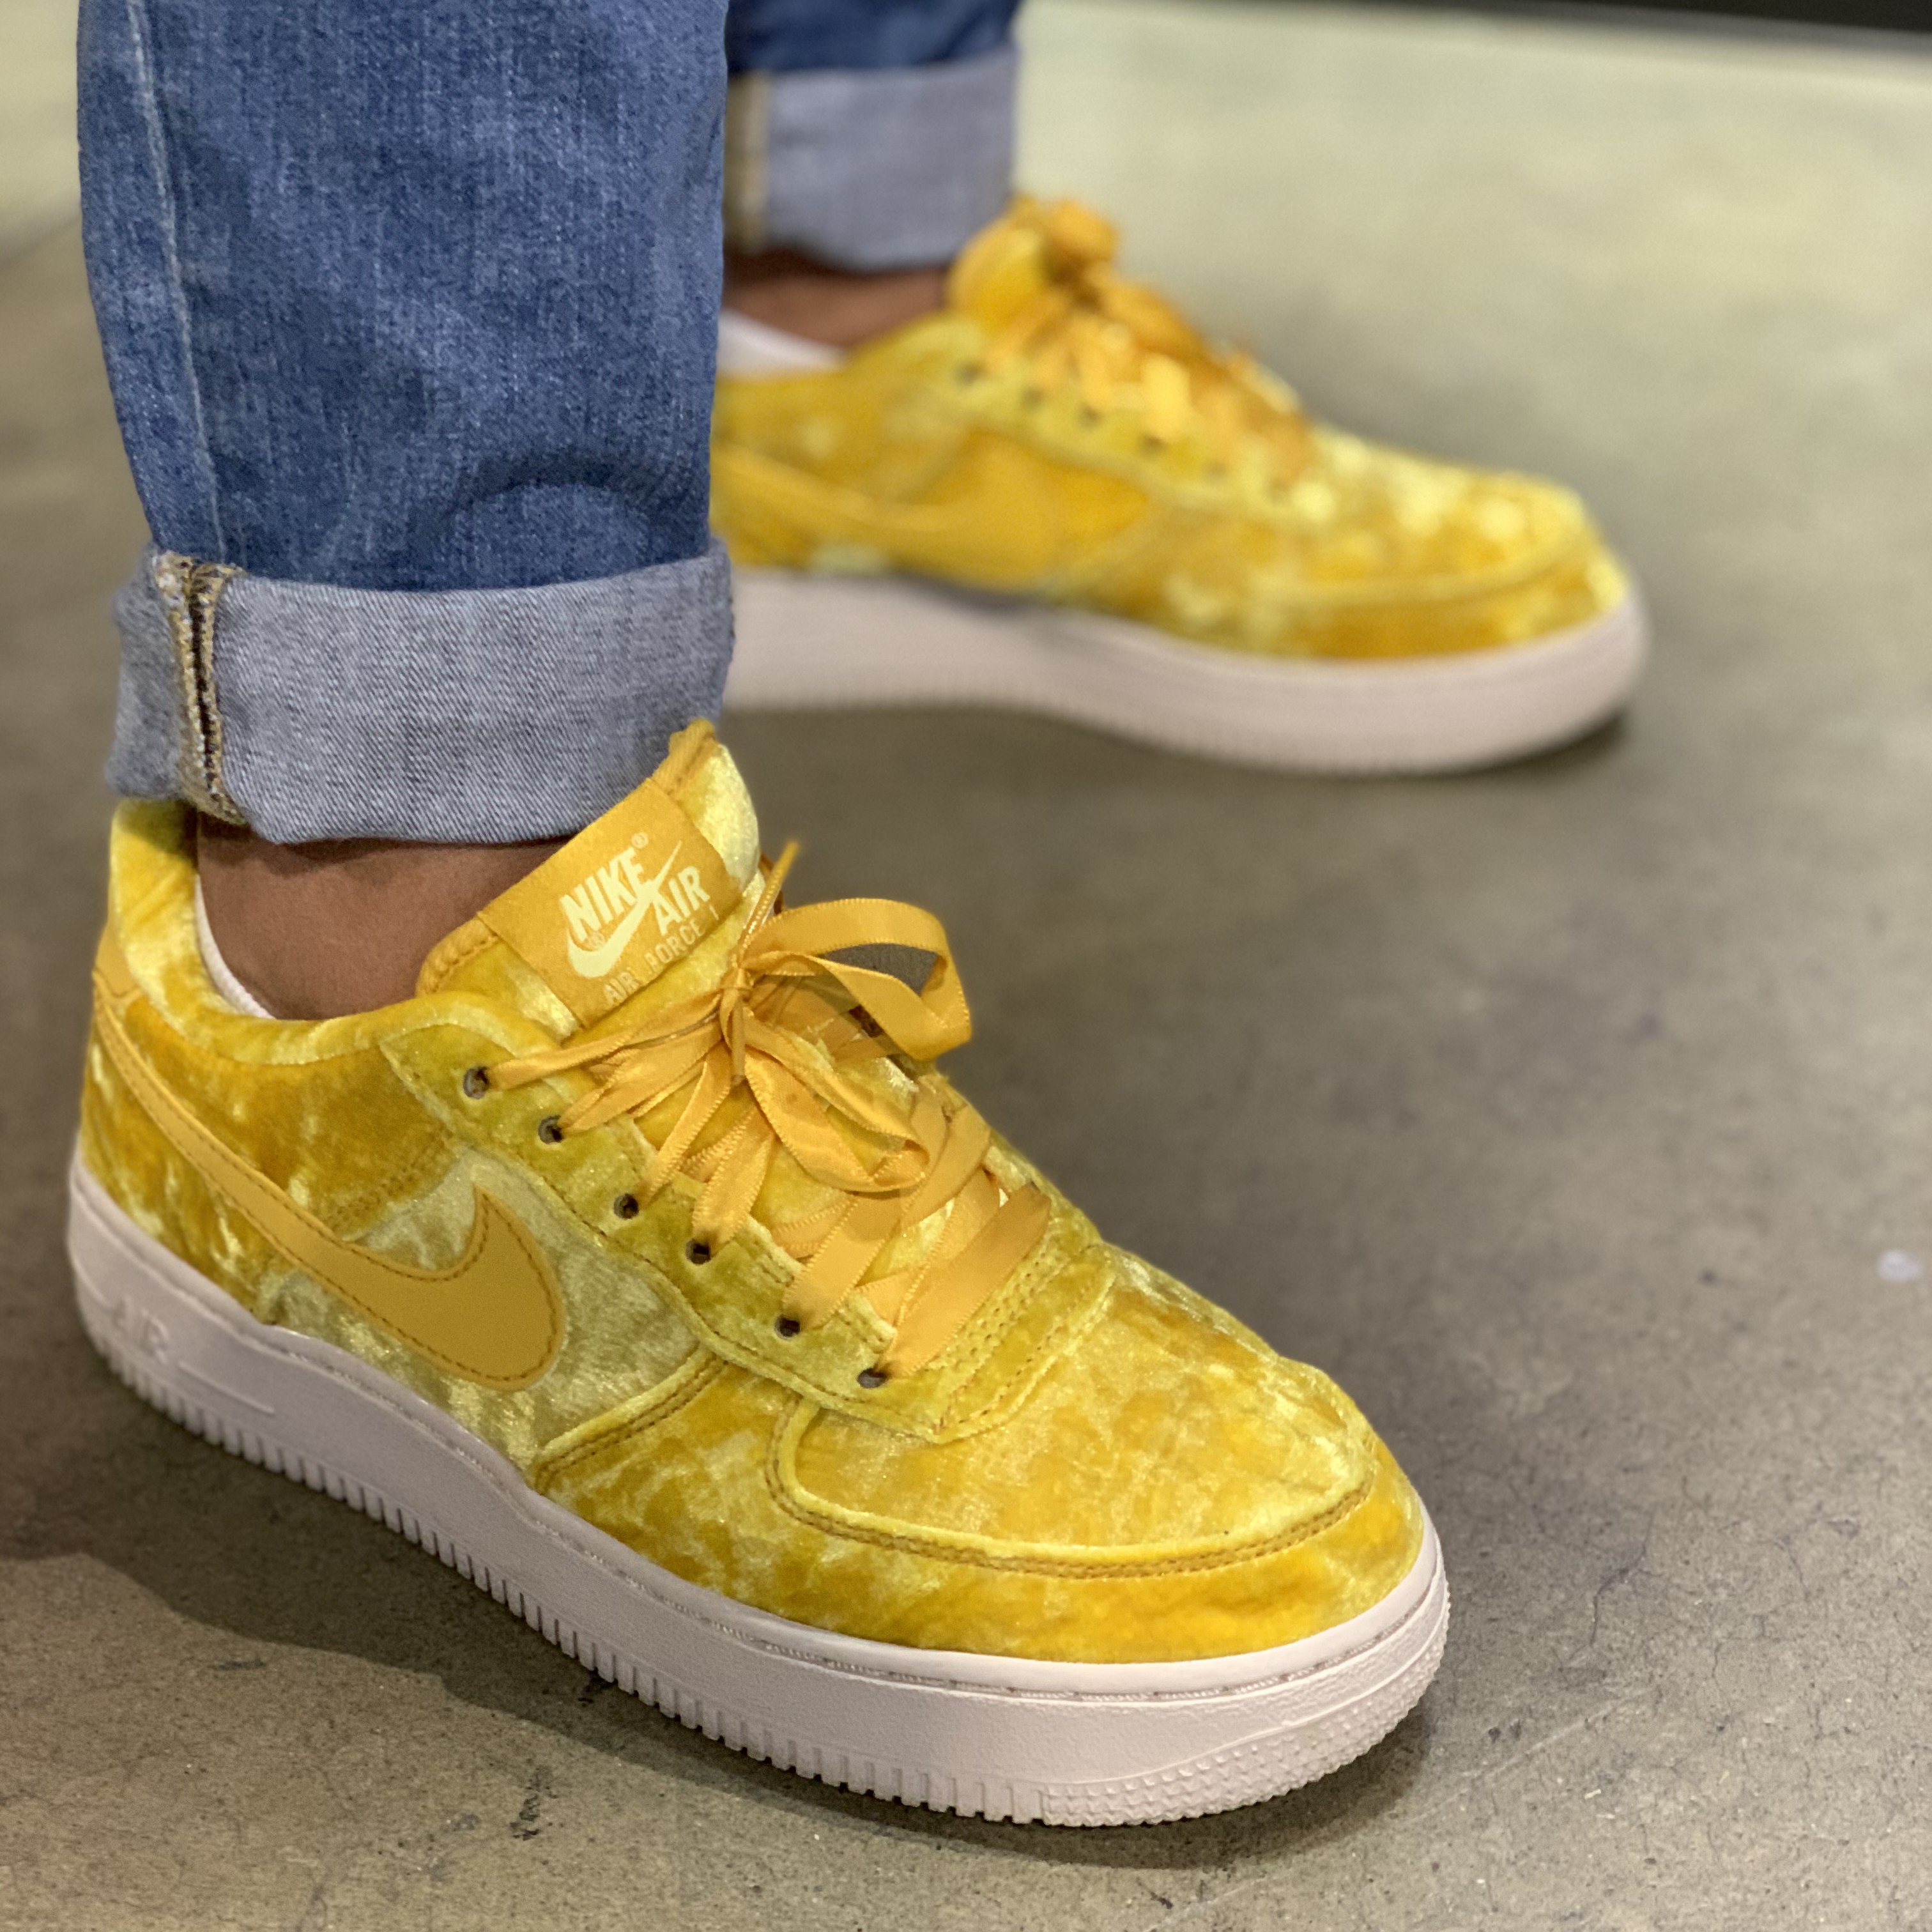 Best Sneakers at ComplexCon 2019 Nike Air Force 1 LV8 Mineral Gold